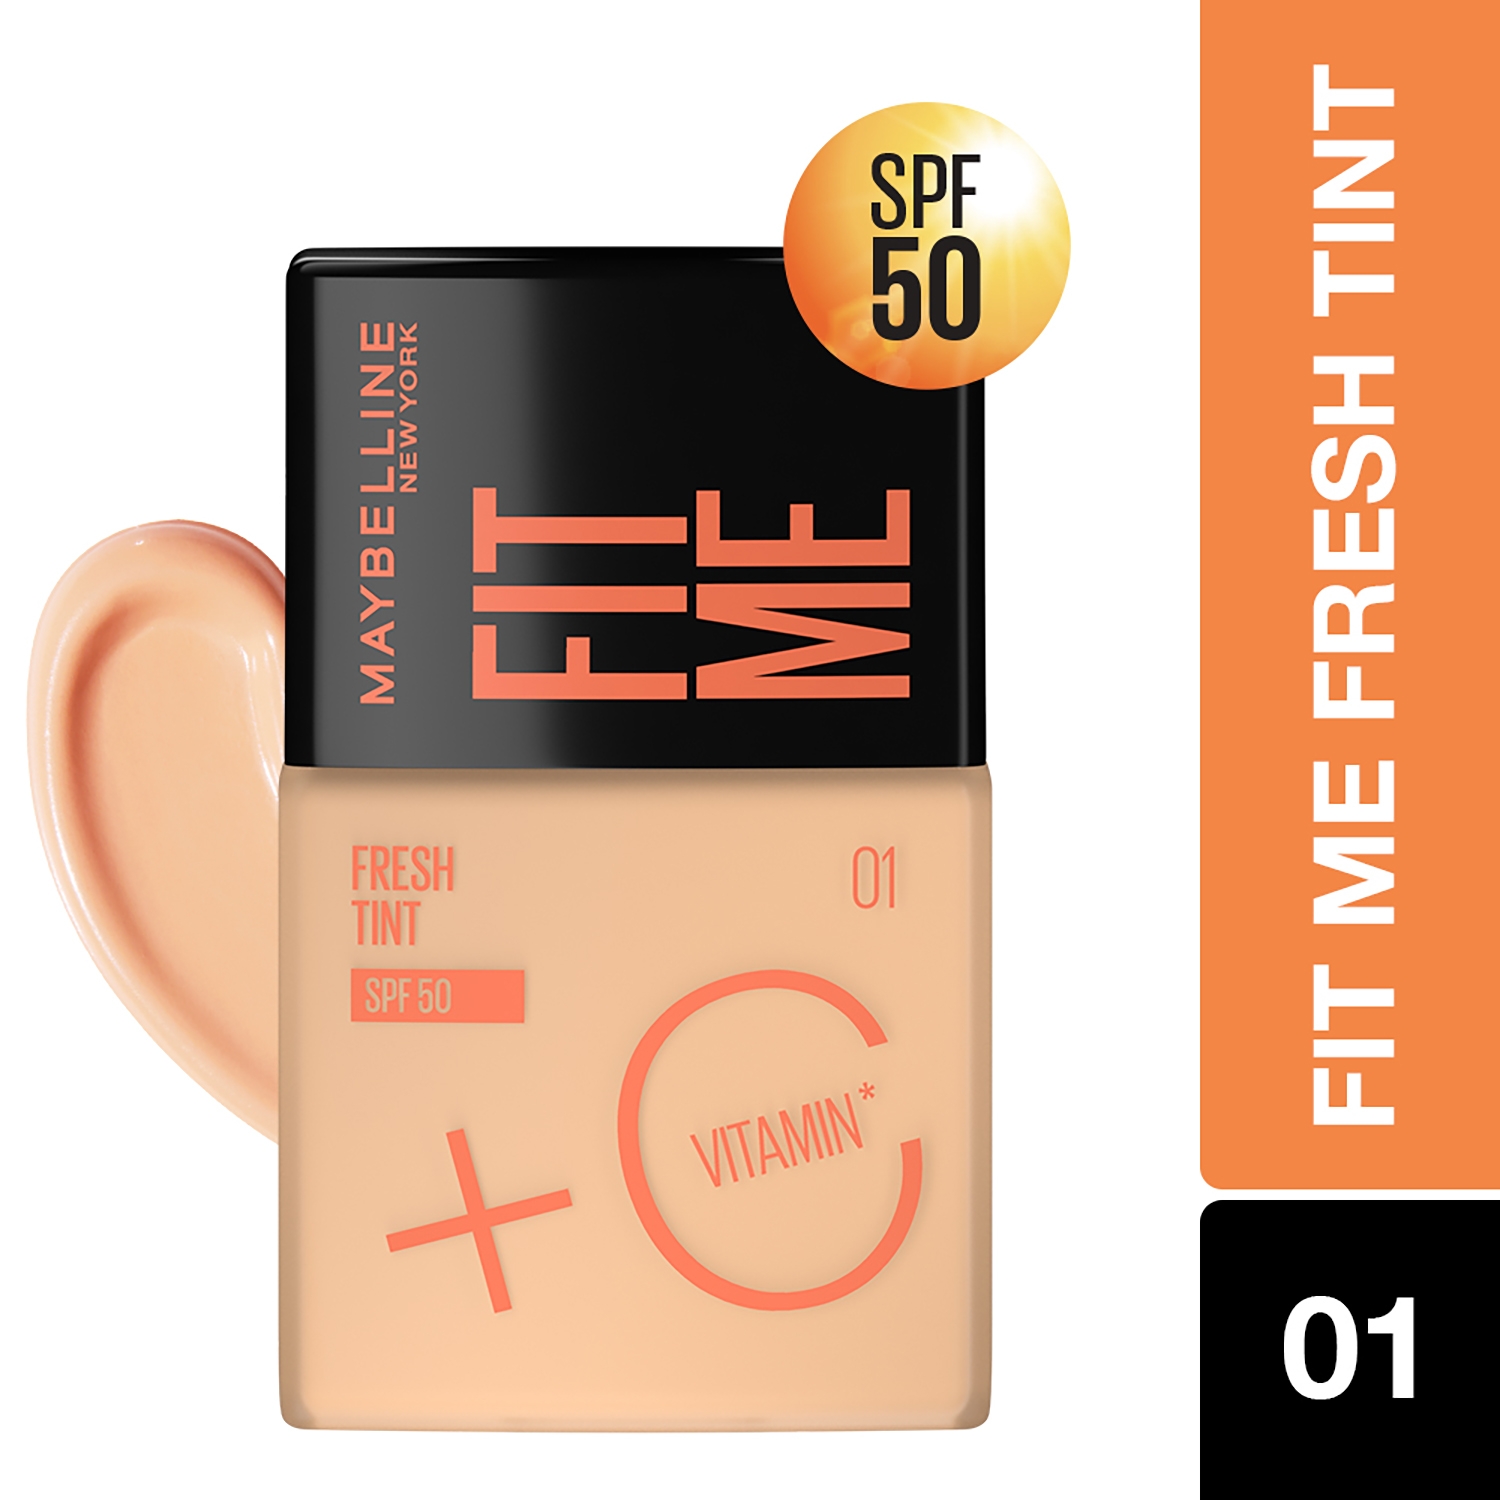 Maybelline New York | Maybelline New York Fit Me Fresh Tint With SPF 50 & Vitamin C - 01 Shade (30ml)